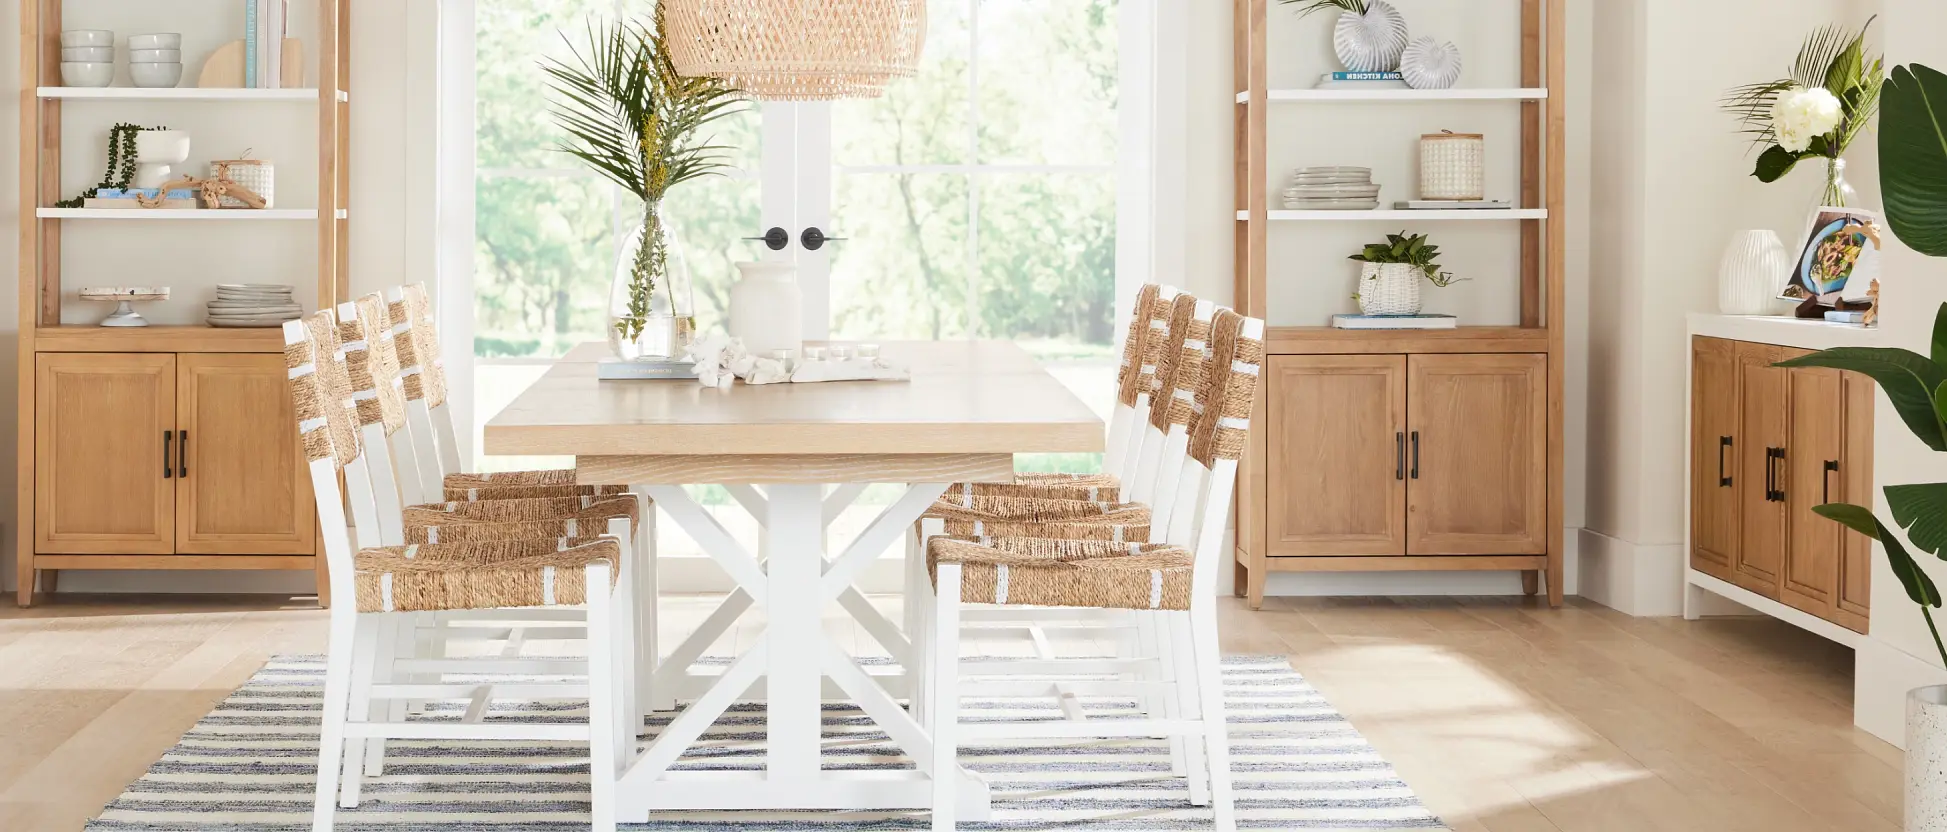 Up to 20% Off Dining Room*